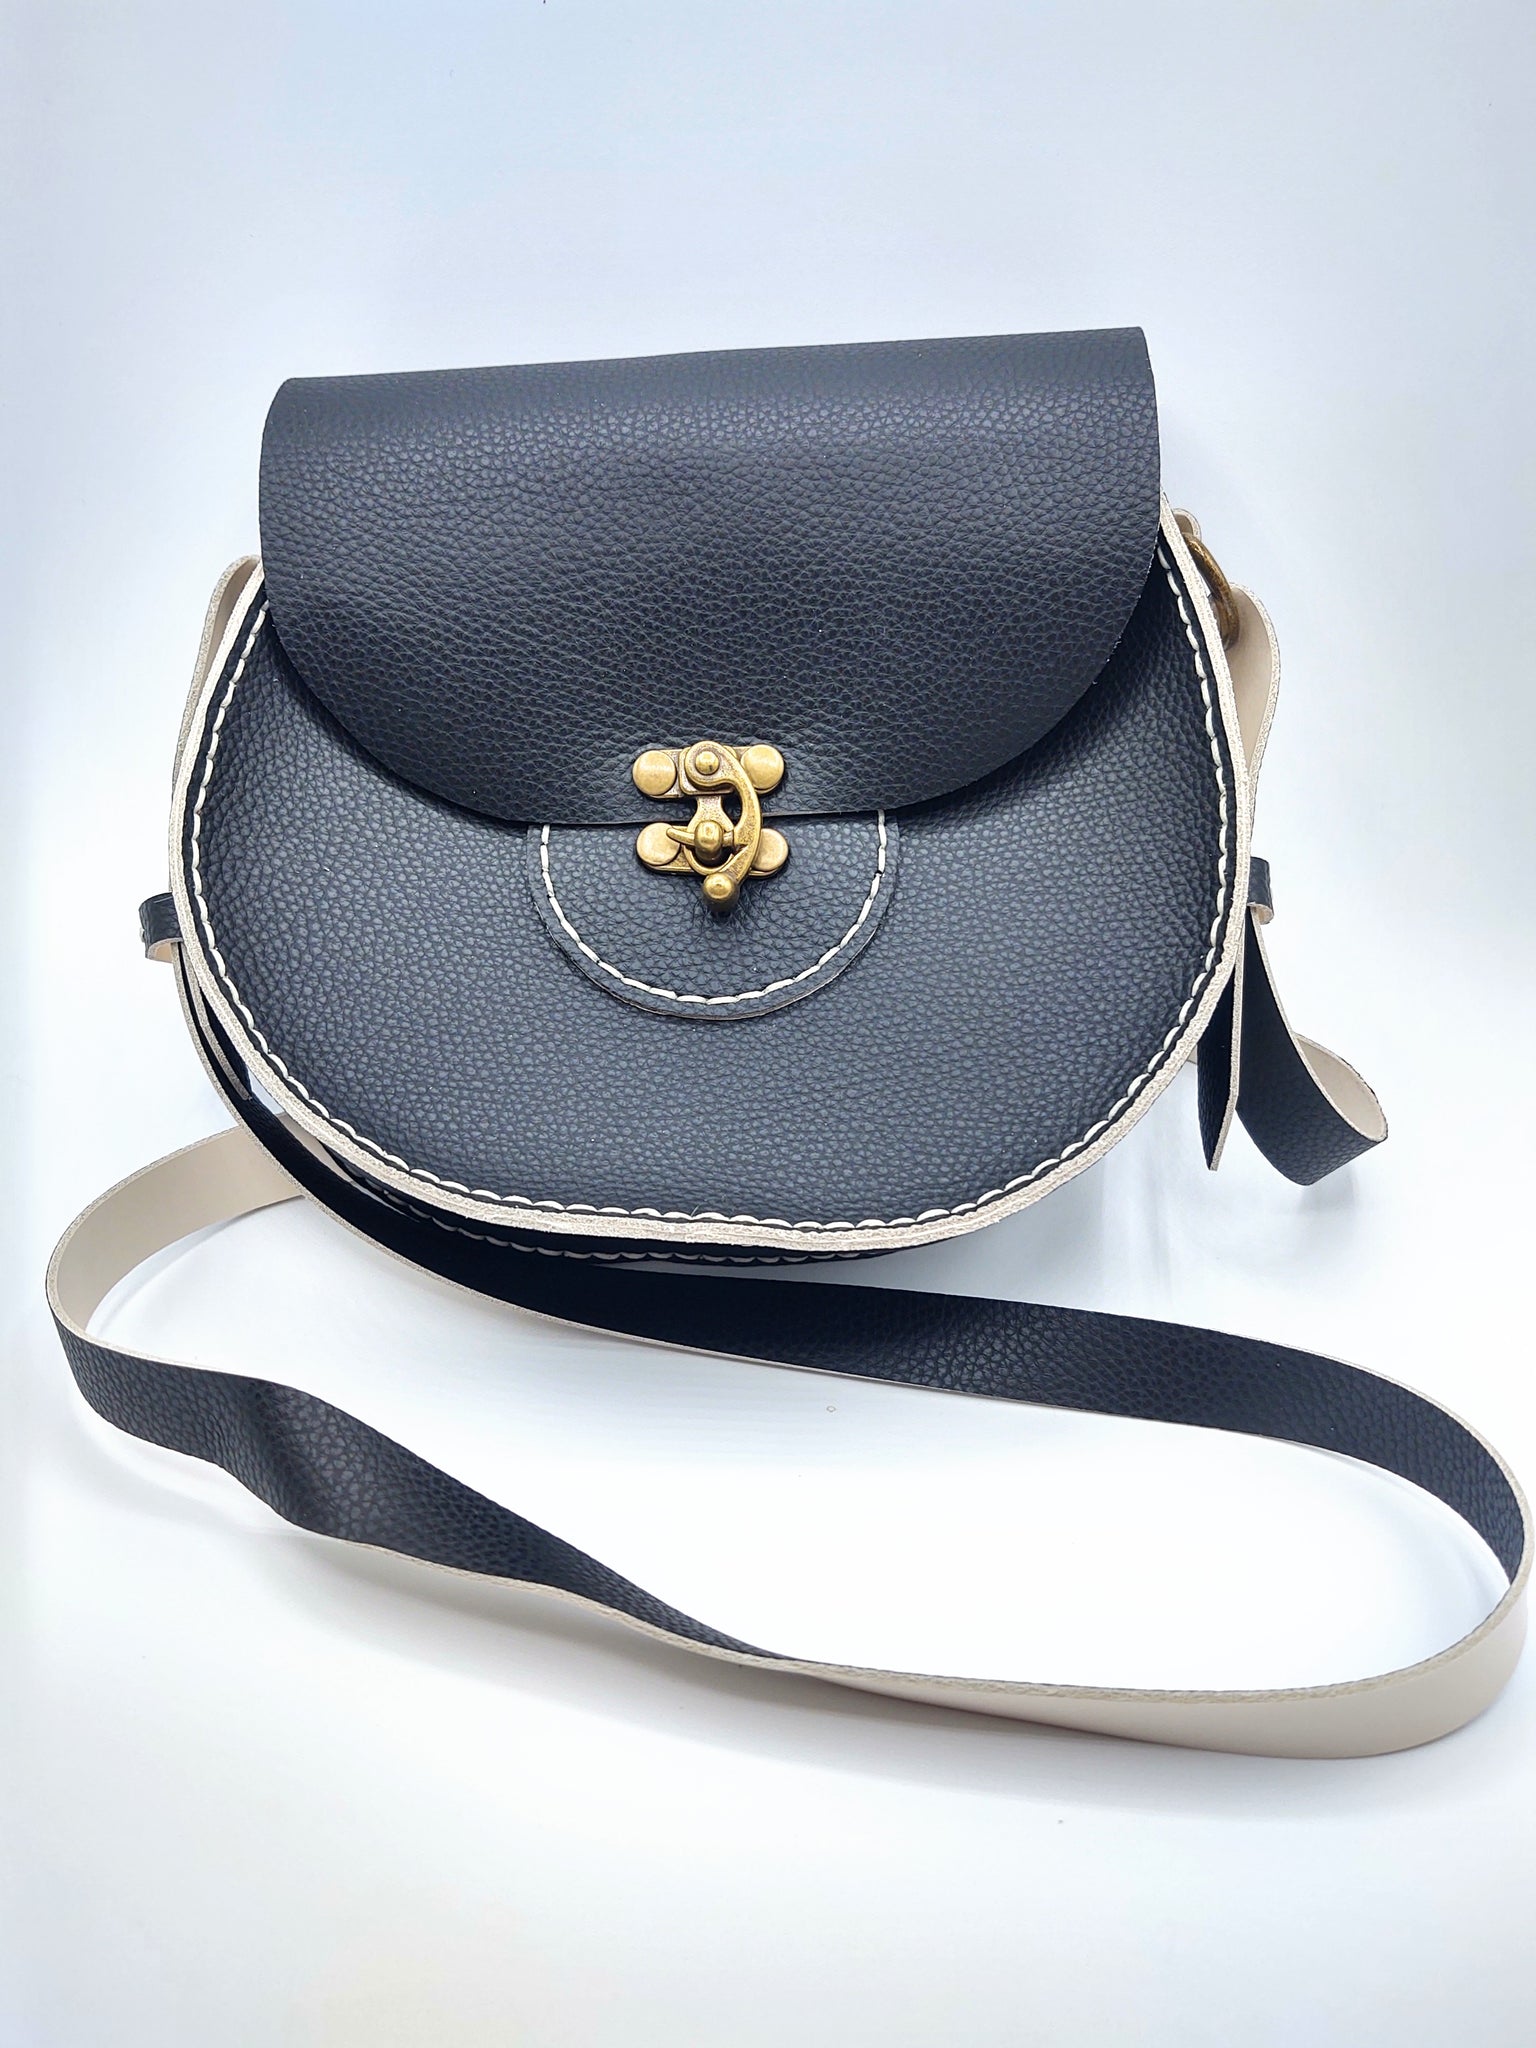 Black and White Purse – Little Owl Leather